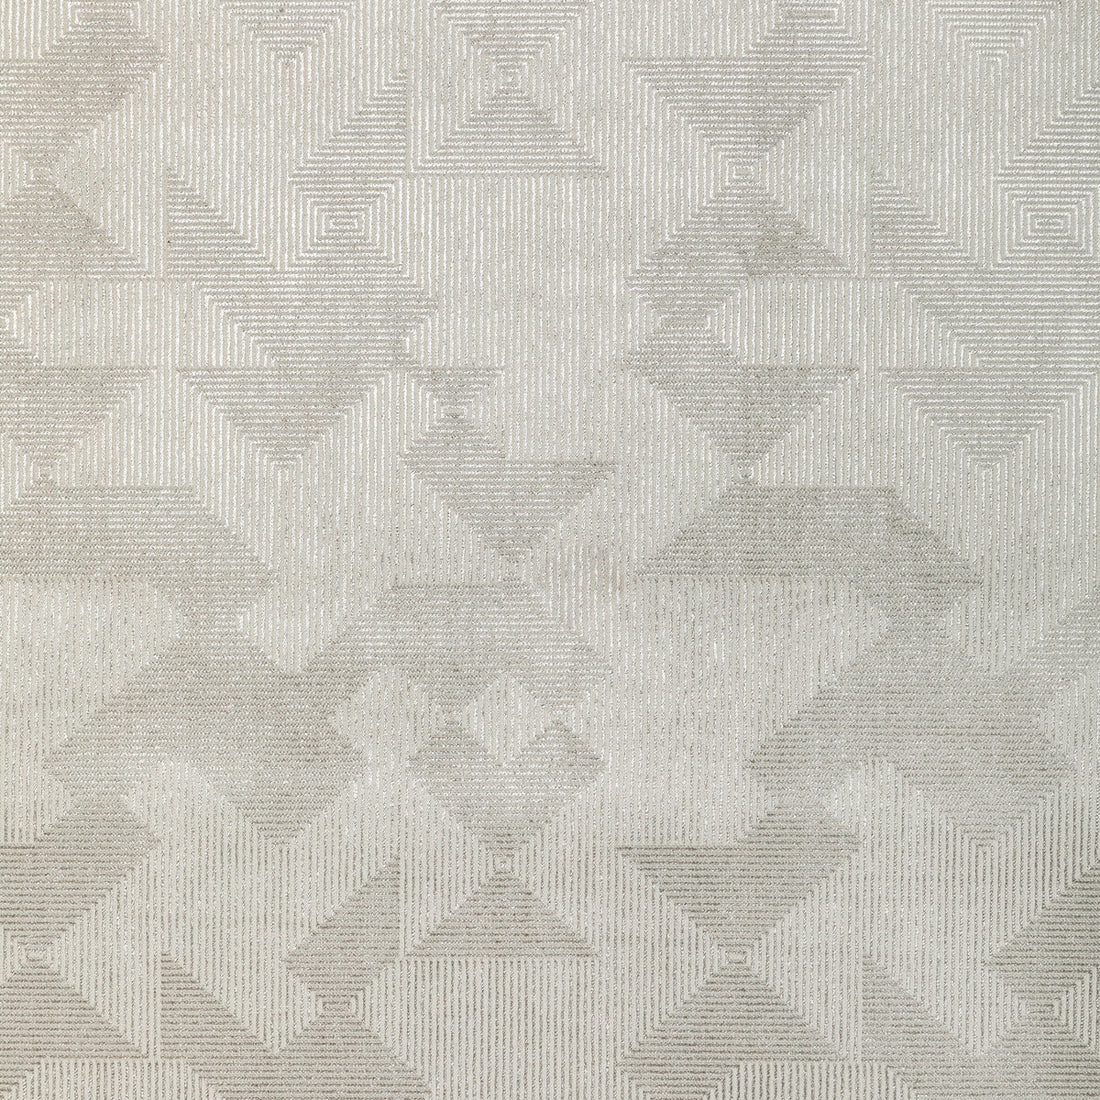 New Order fabric in limestone color - pattern 36043.11.0 - by Kravet Contract